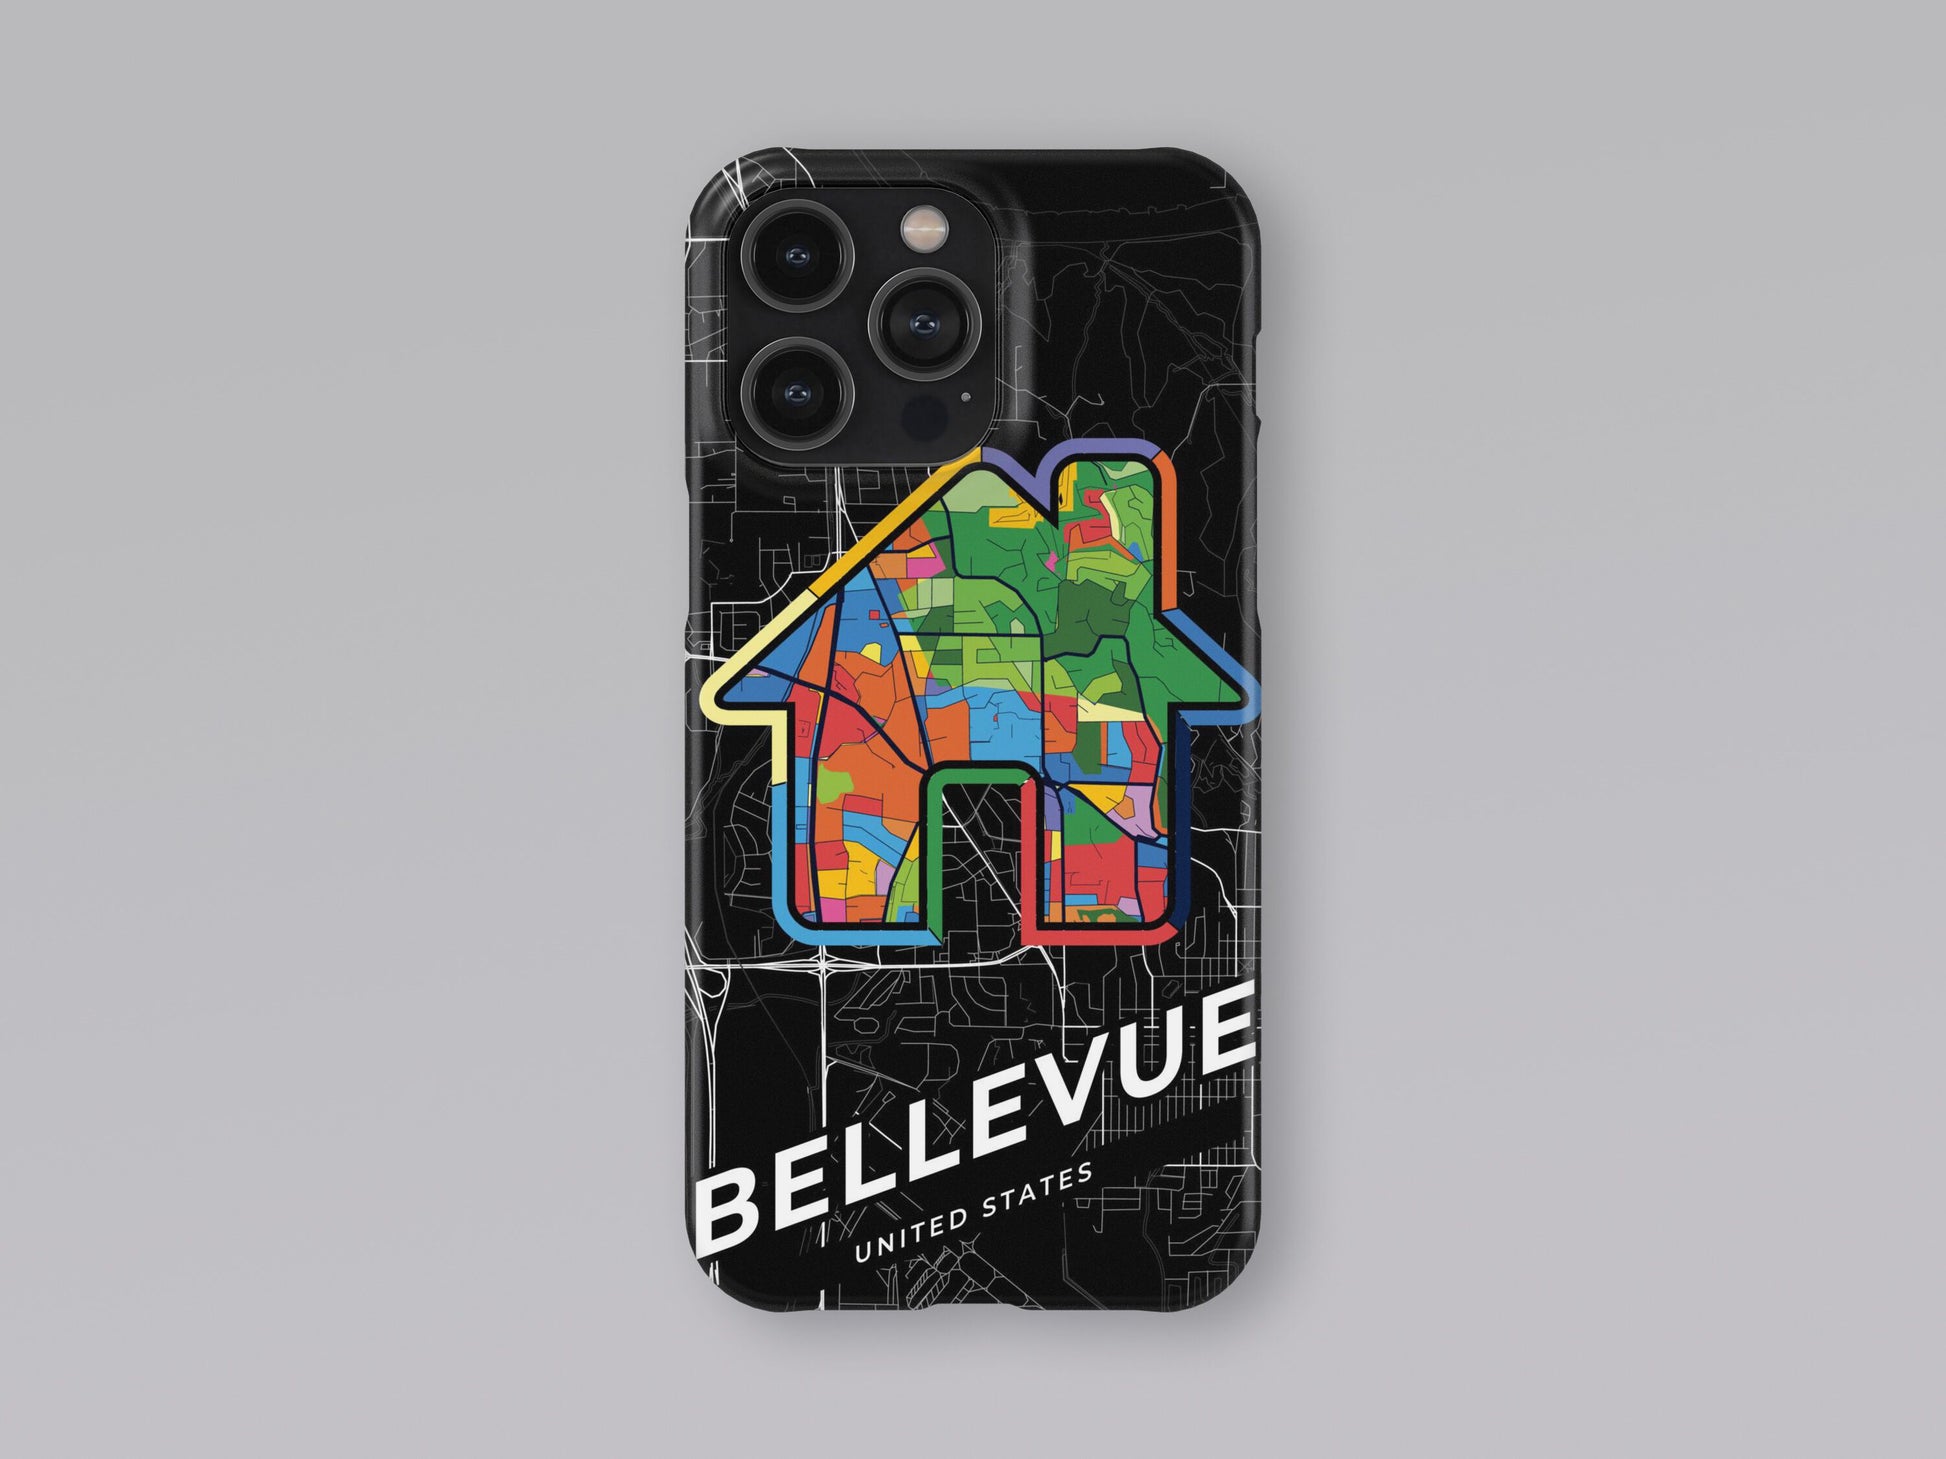 Bellevue Nebraska slim phone case with colorful icon. Birthday, wedding or housewarming gift. Couple match cases. 3